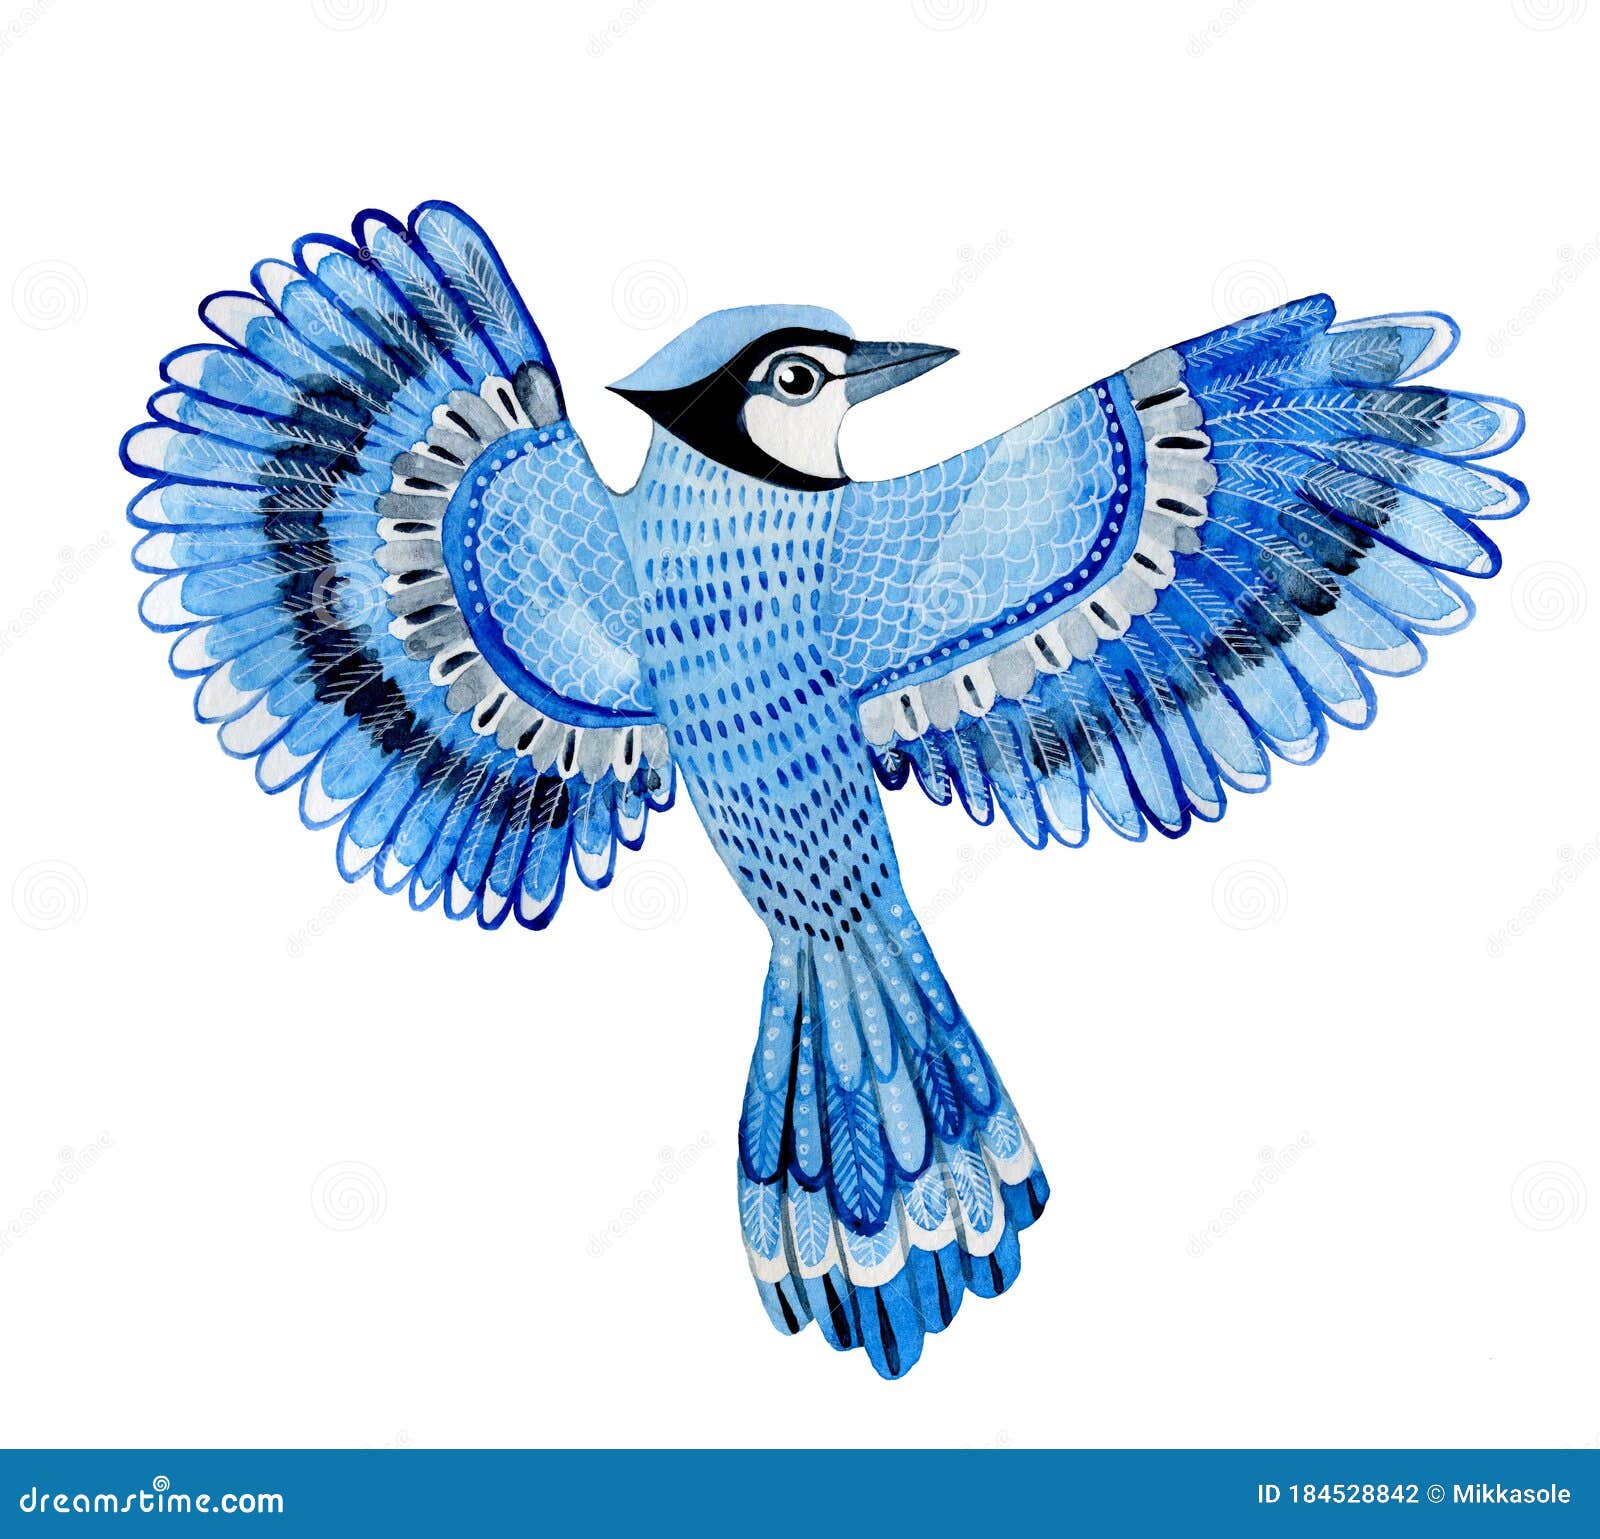 Watercolor Bird Blue Jay Flying Hand Drawn Illustration Isolated On White Background Hand Painted Bluejay Stock Illustration Illustration Of Close Fauna